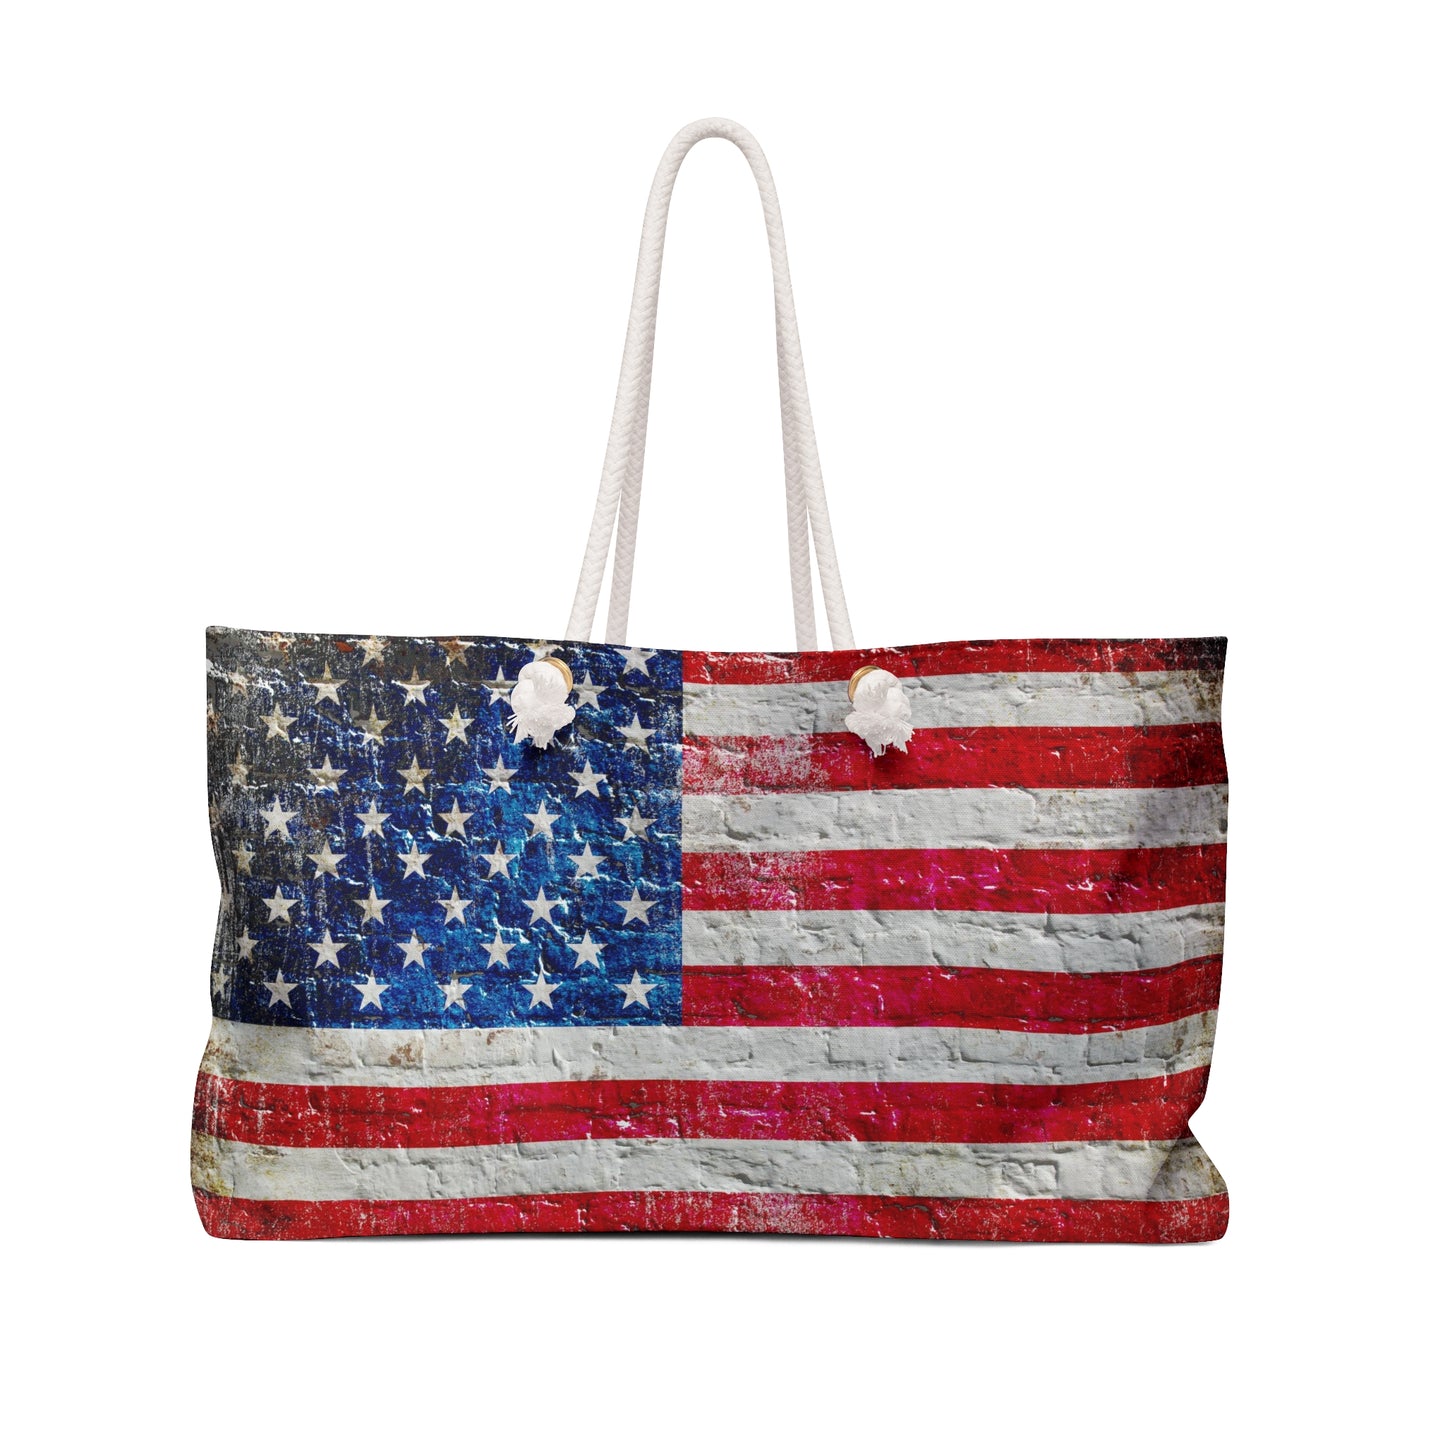 American Flag Themed Bags and Accessories - Distressed American Flag on Brick Printed on Weekender Bag